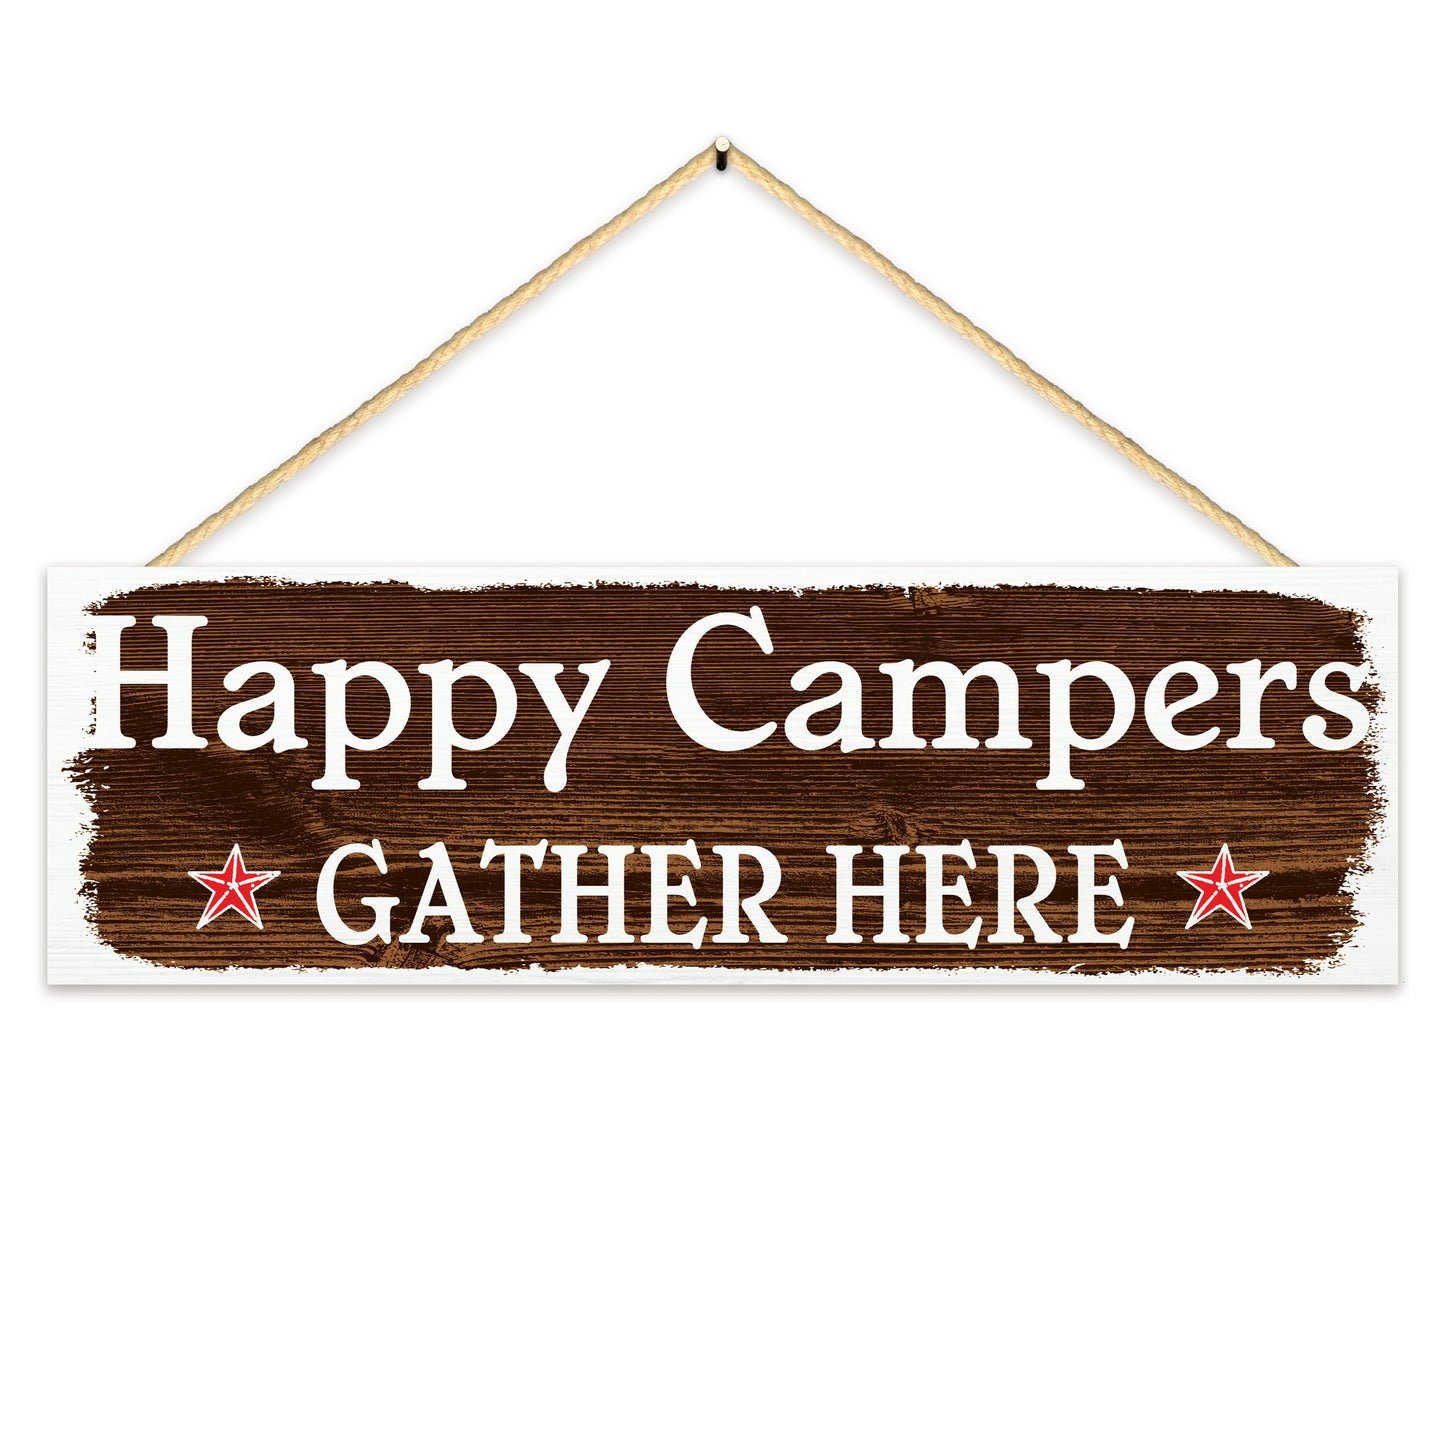 Happy Campers Gather Here.